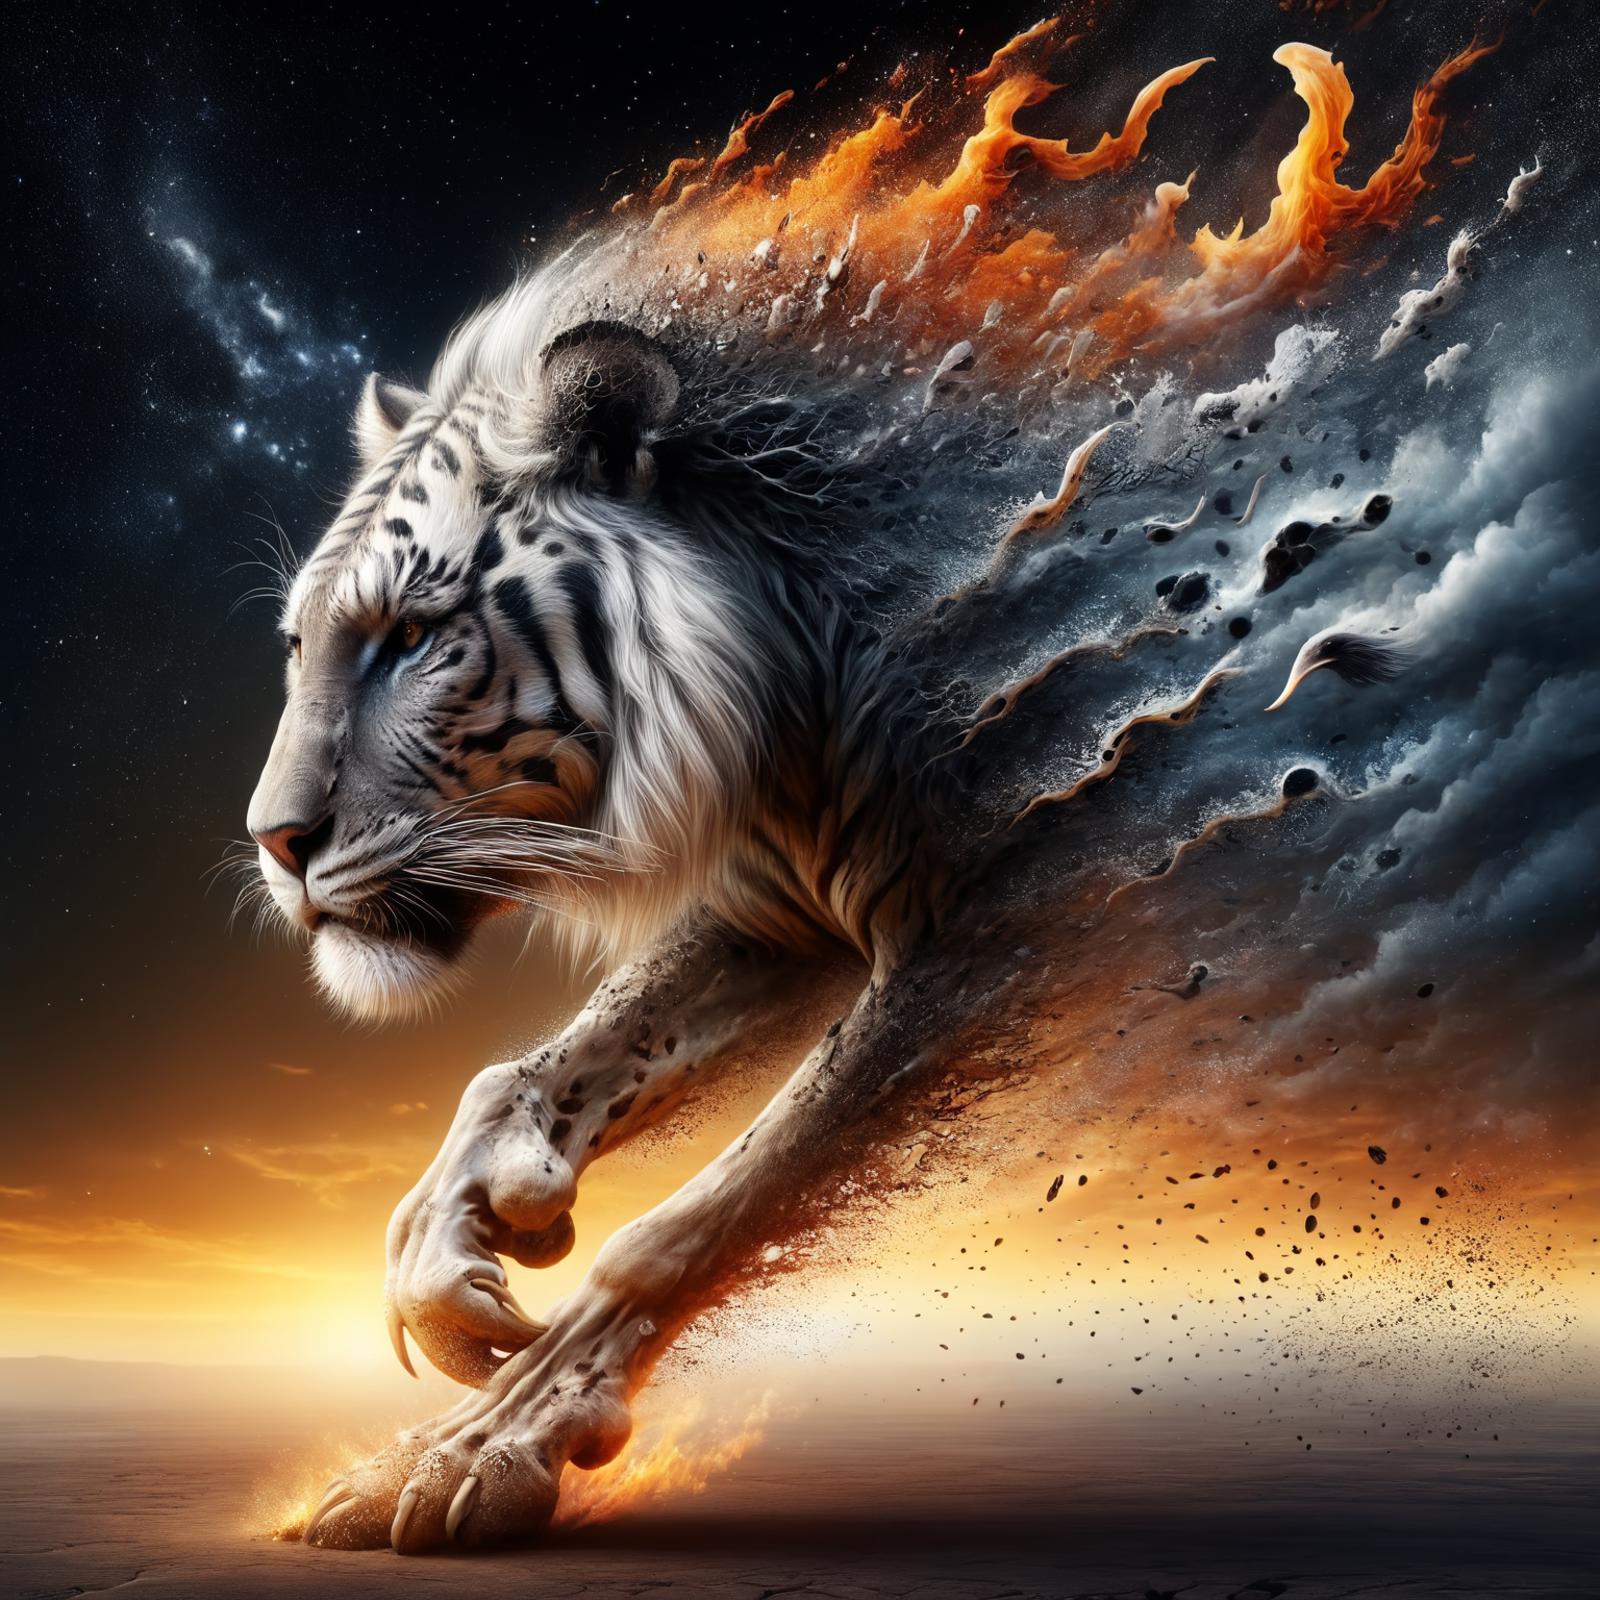 Artistic Painting of a Tiger with a Blazing Sunset and Clouds in the Background